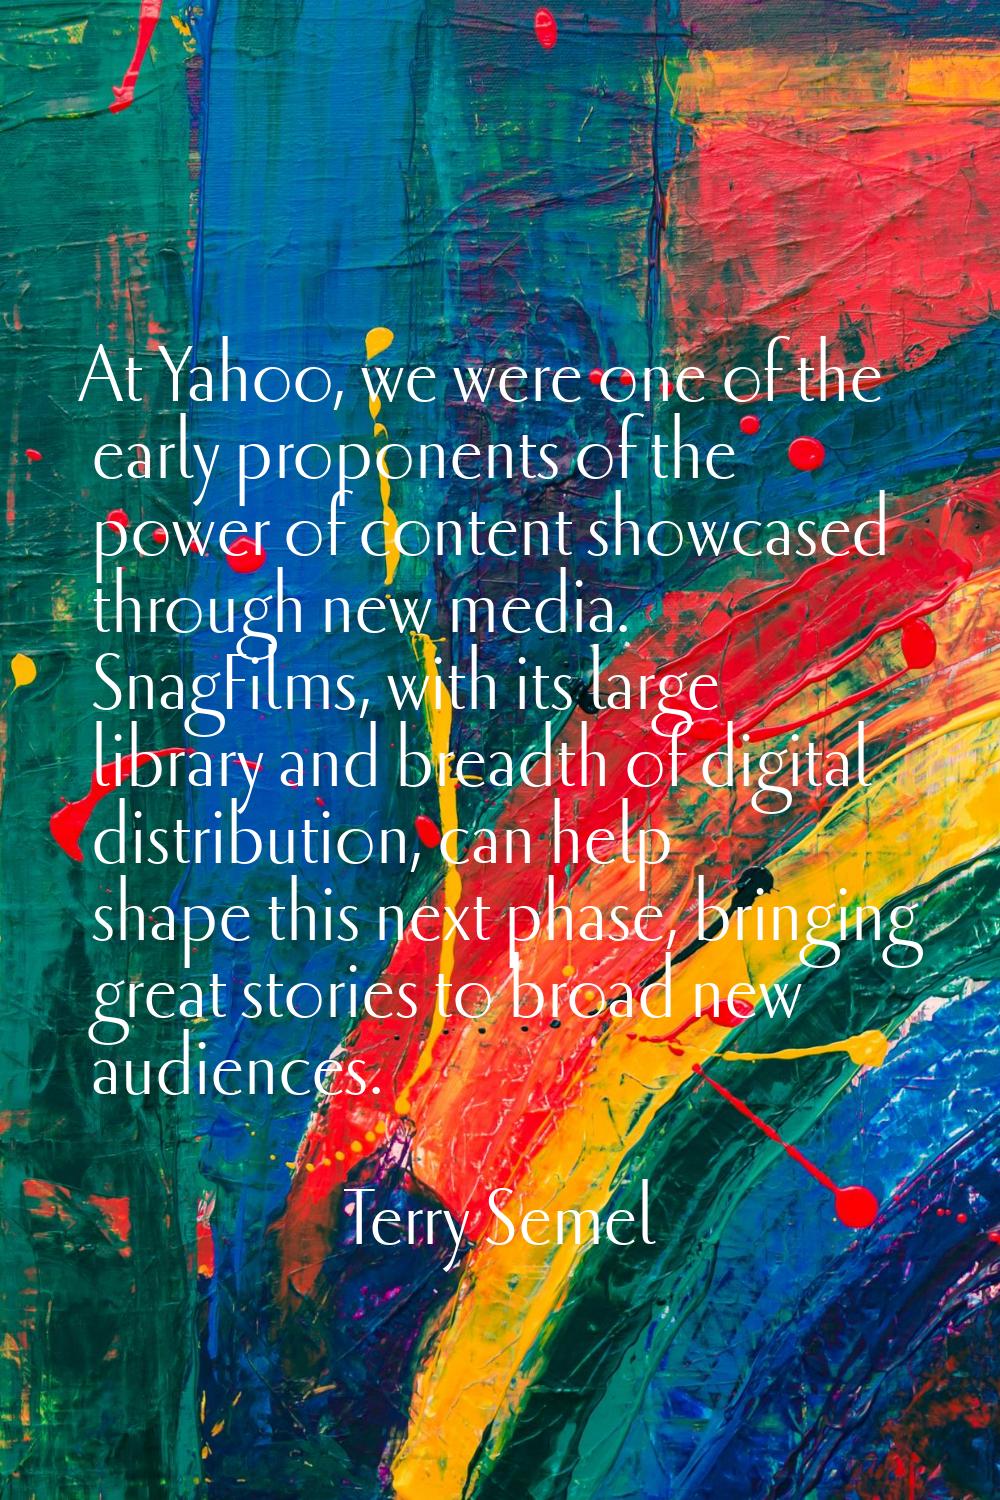 At Yahoo, we were one of the early proponents of the power of content showcased through new media. 